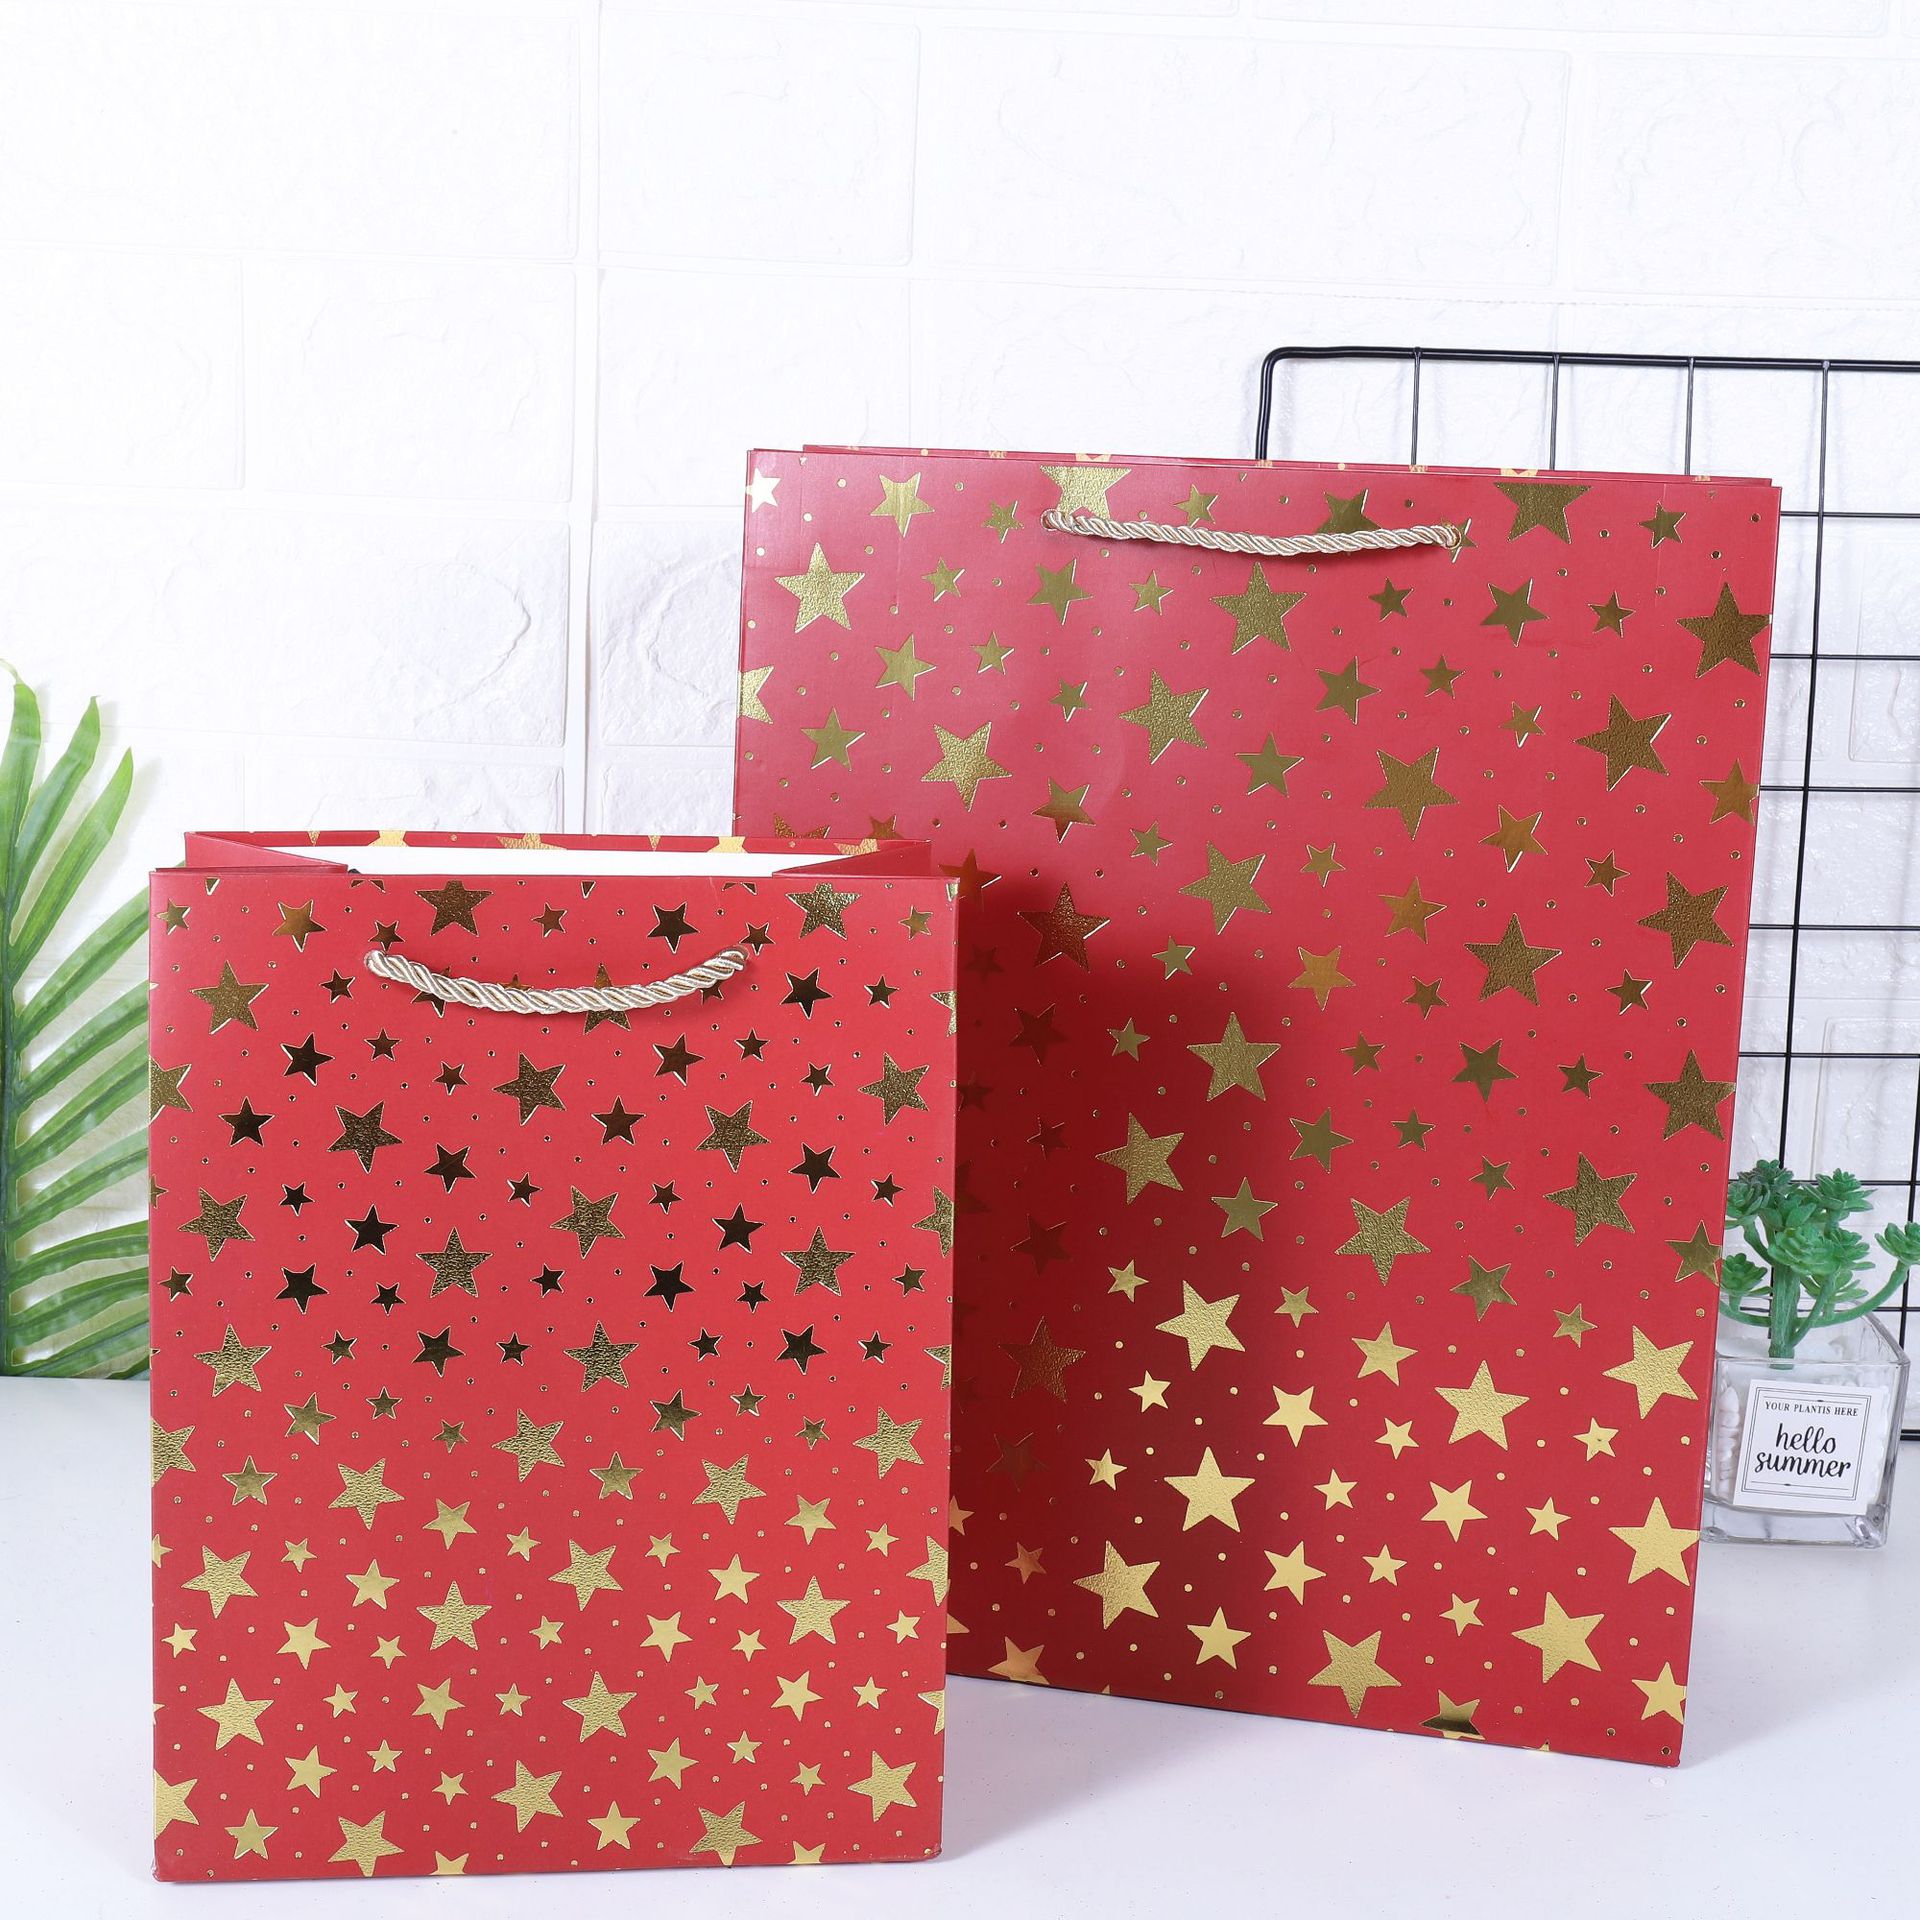 Gilding Five-Pointed Star Paper Gift Handbag Full Version XINGX White Card Gift Bag Exclusive for Cross-Border Paper Bag in Stock